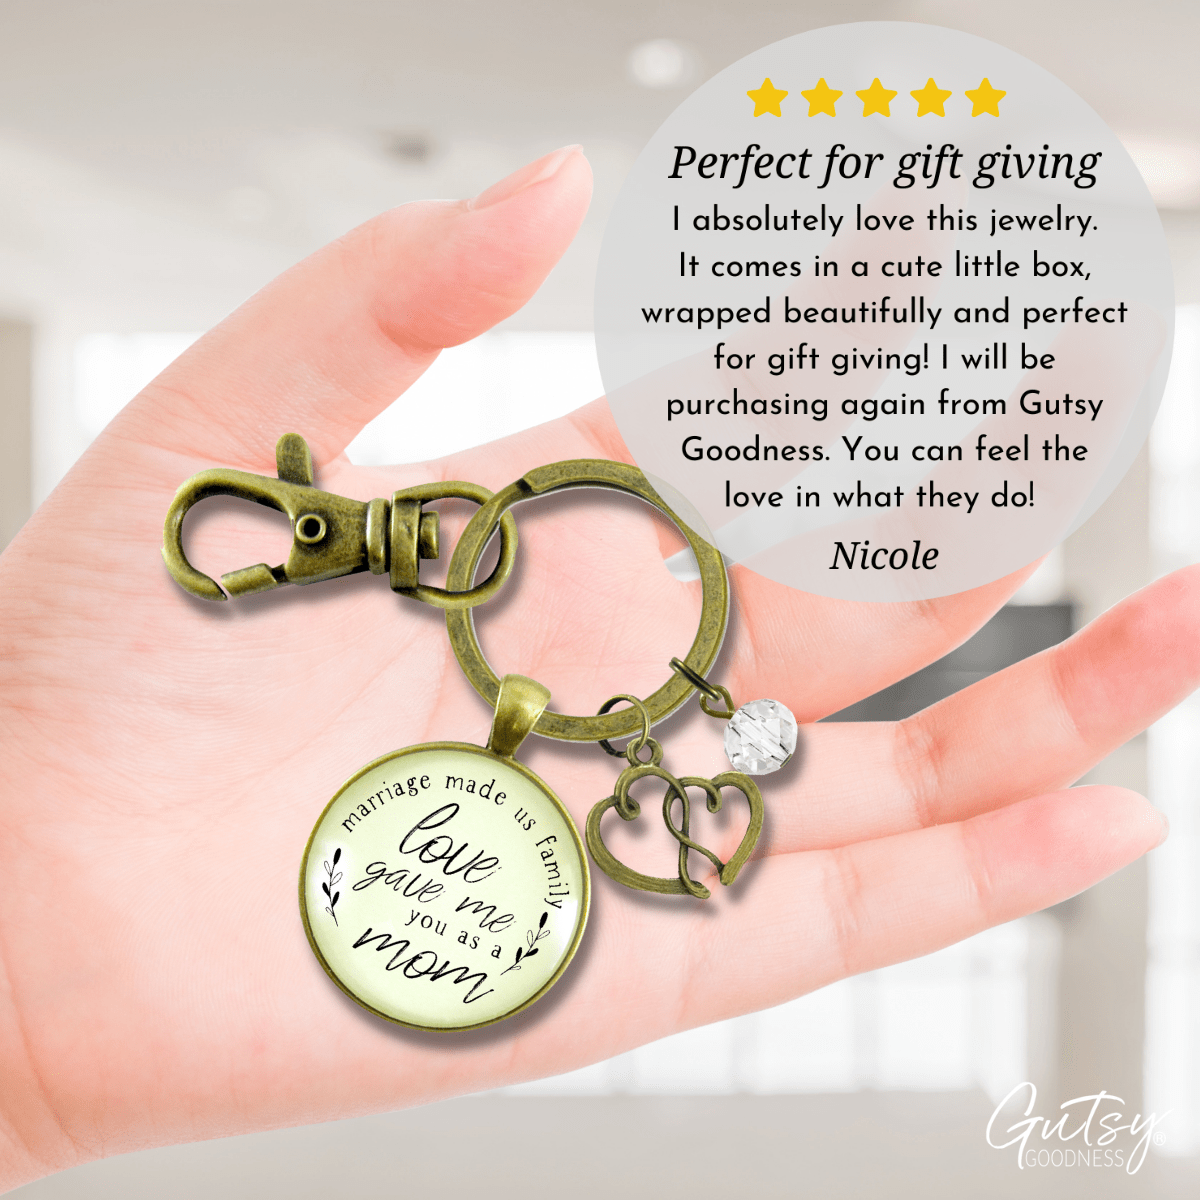 Mother In Law Keychain Blended Family Step Mom Gift Marriage Made Us Family Jewelry Heart - Gutsy Goodness Handmade Jewelry;Mother In Law Keychain Blended Family Step Mom Gift Marriage Made Us Family Jewelry Heart - Gutsy Goodness Handmade Jewelry Gifts